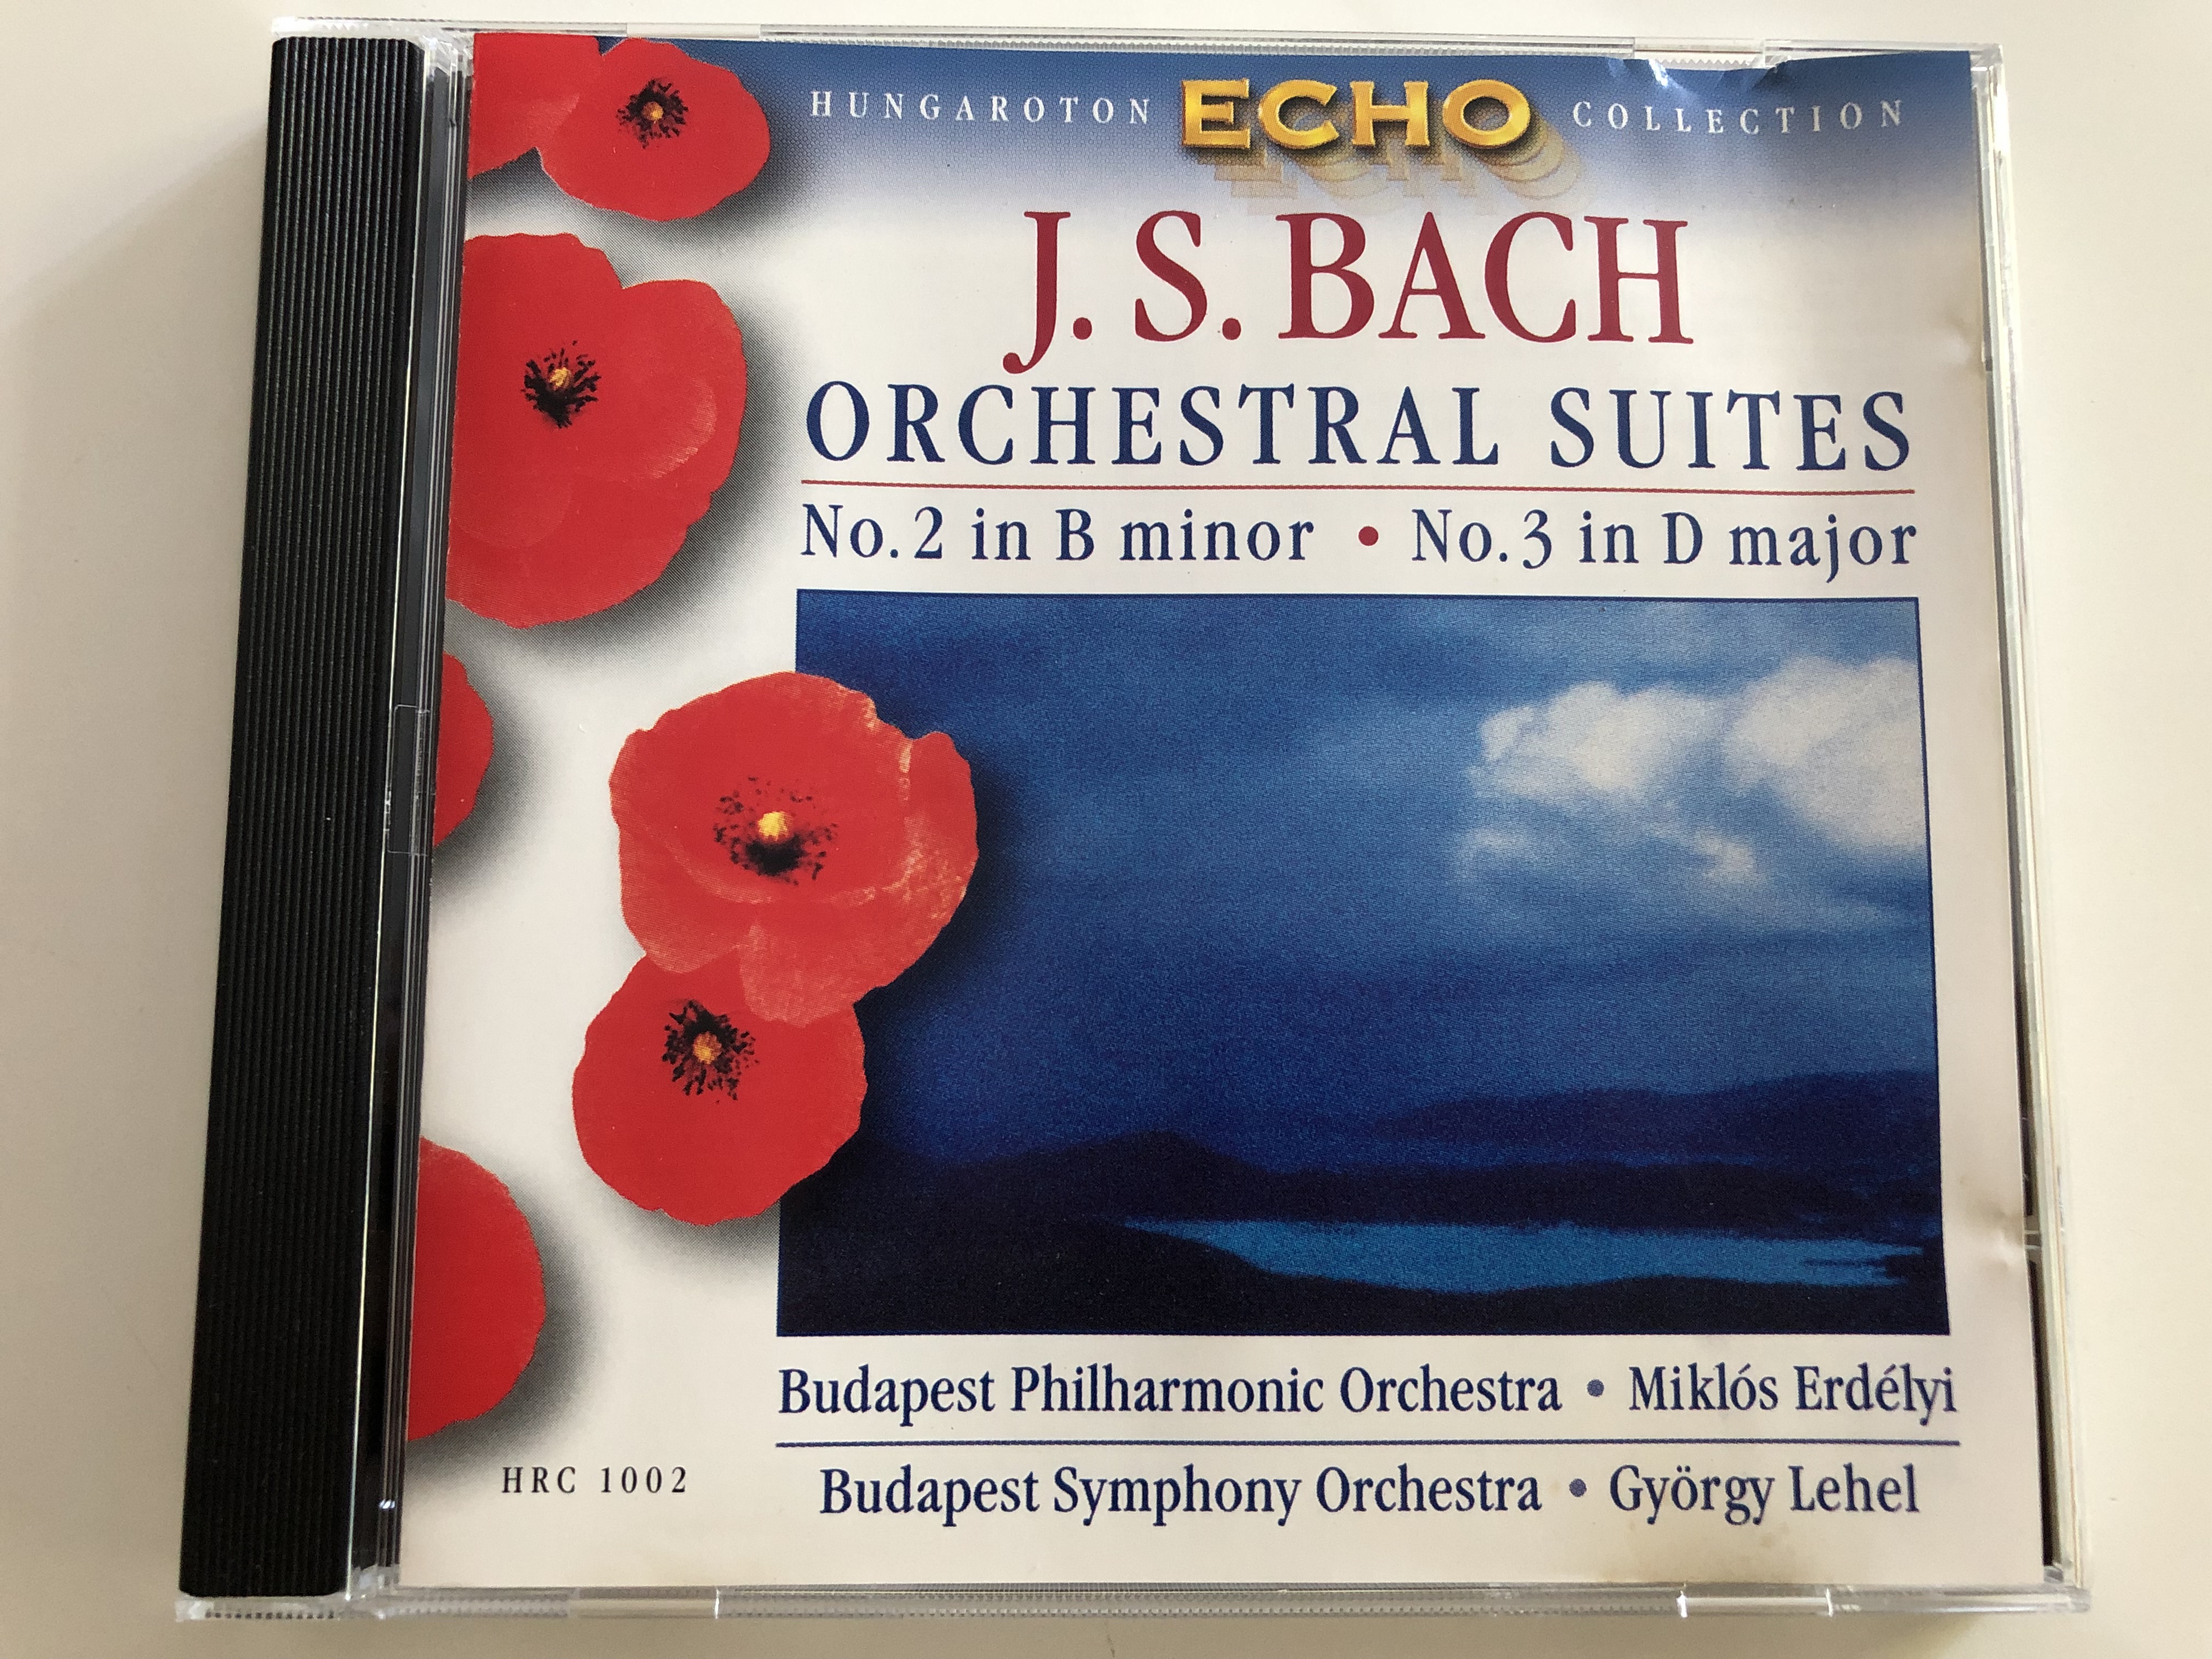 j.-s.-bach-orchestral-suites-no.-2-in-b-minor-no.-3-in-d-major-budapest-philharmonic-orchestra-conducted-by-mikl-s-erd-lyi-budapest-symphony-orchestra-gy-rgy-lehel-hungaroton-echo-collection-hrc-1002-audio-cd-1999-1-.jpg